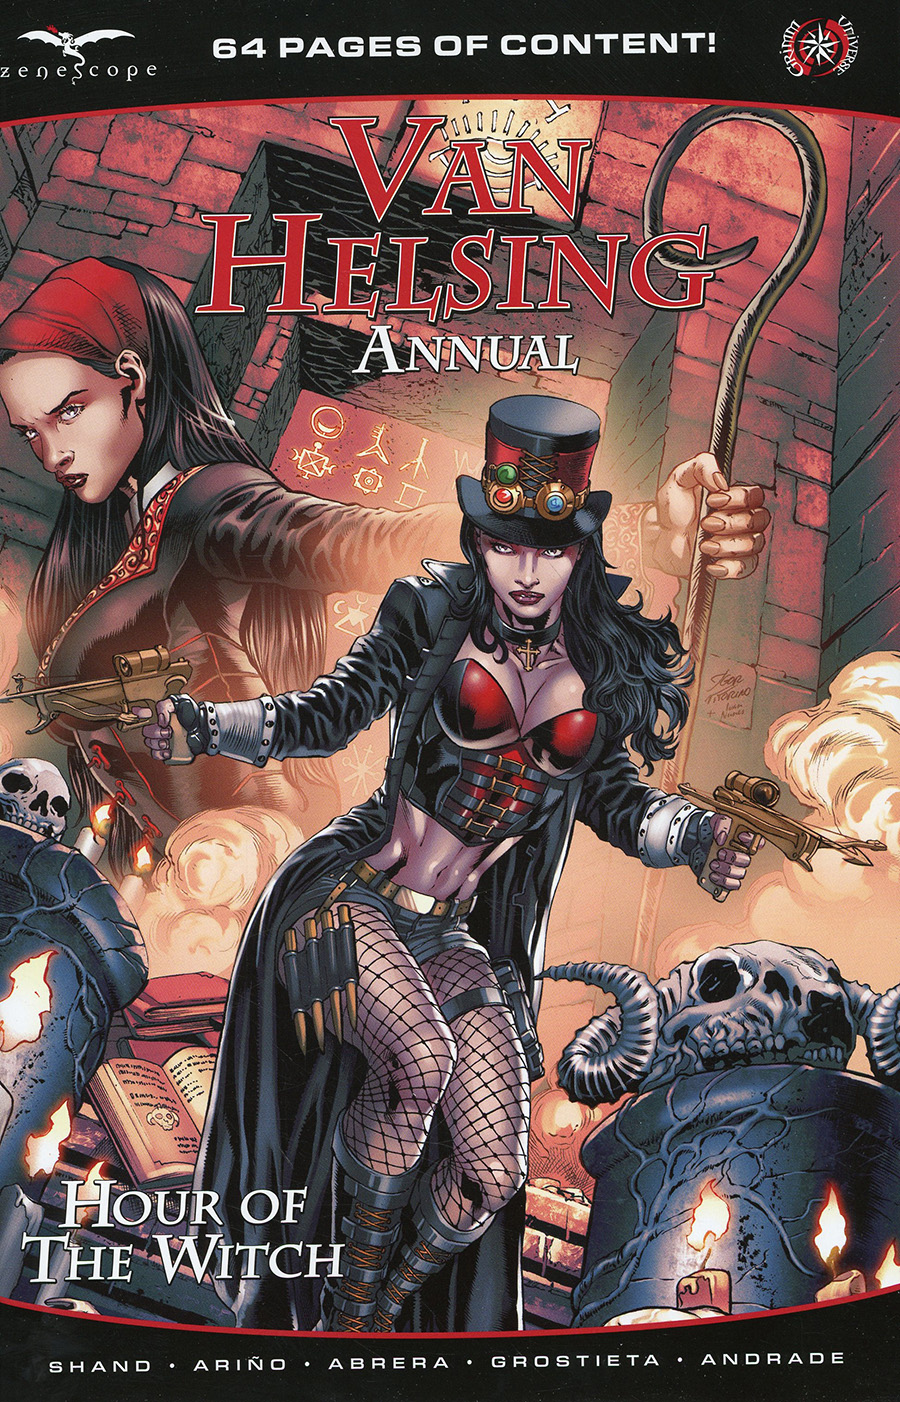 Grimm Fairy Tales Presents Van Helsing Annual Hour Of The Witch #1 (One Shot) Cover A Igor Vitorino